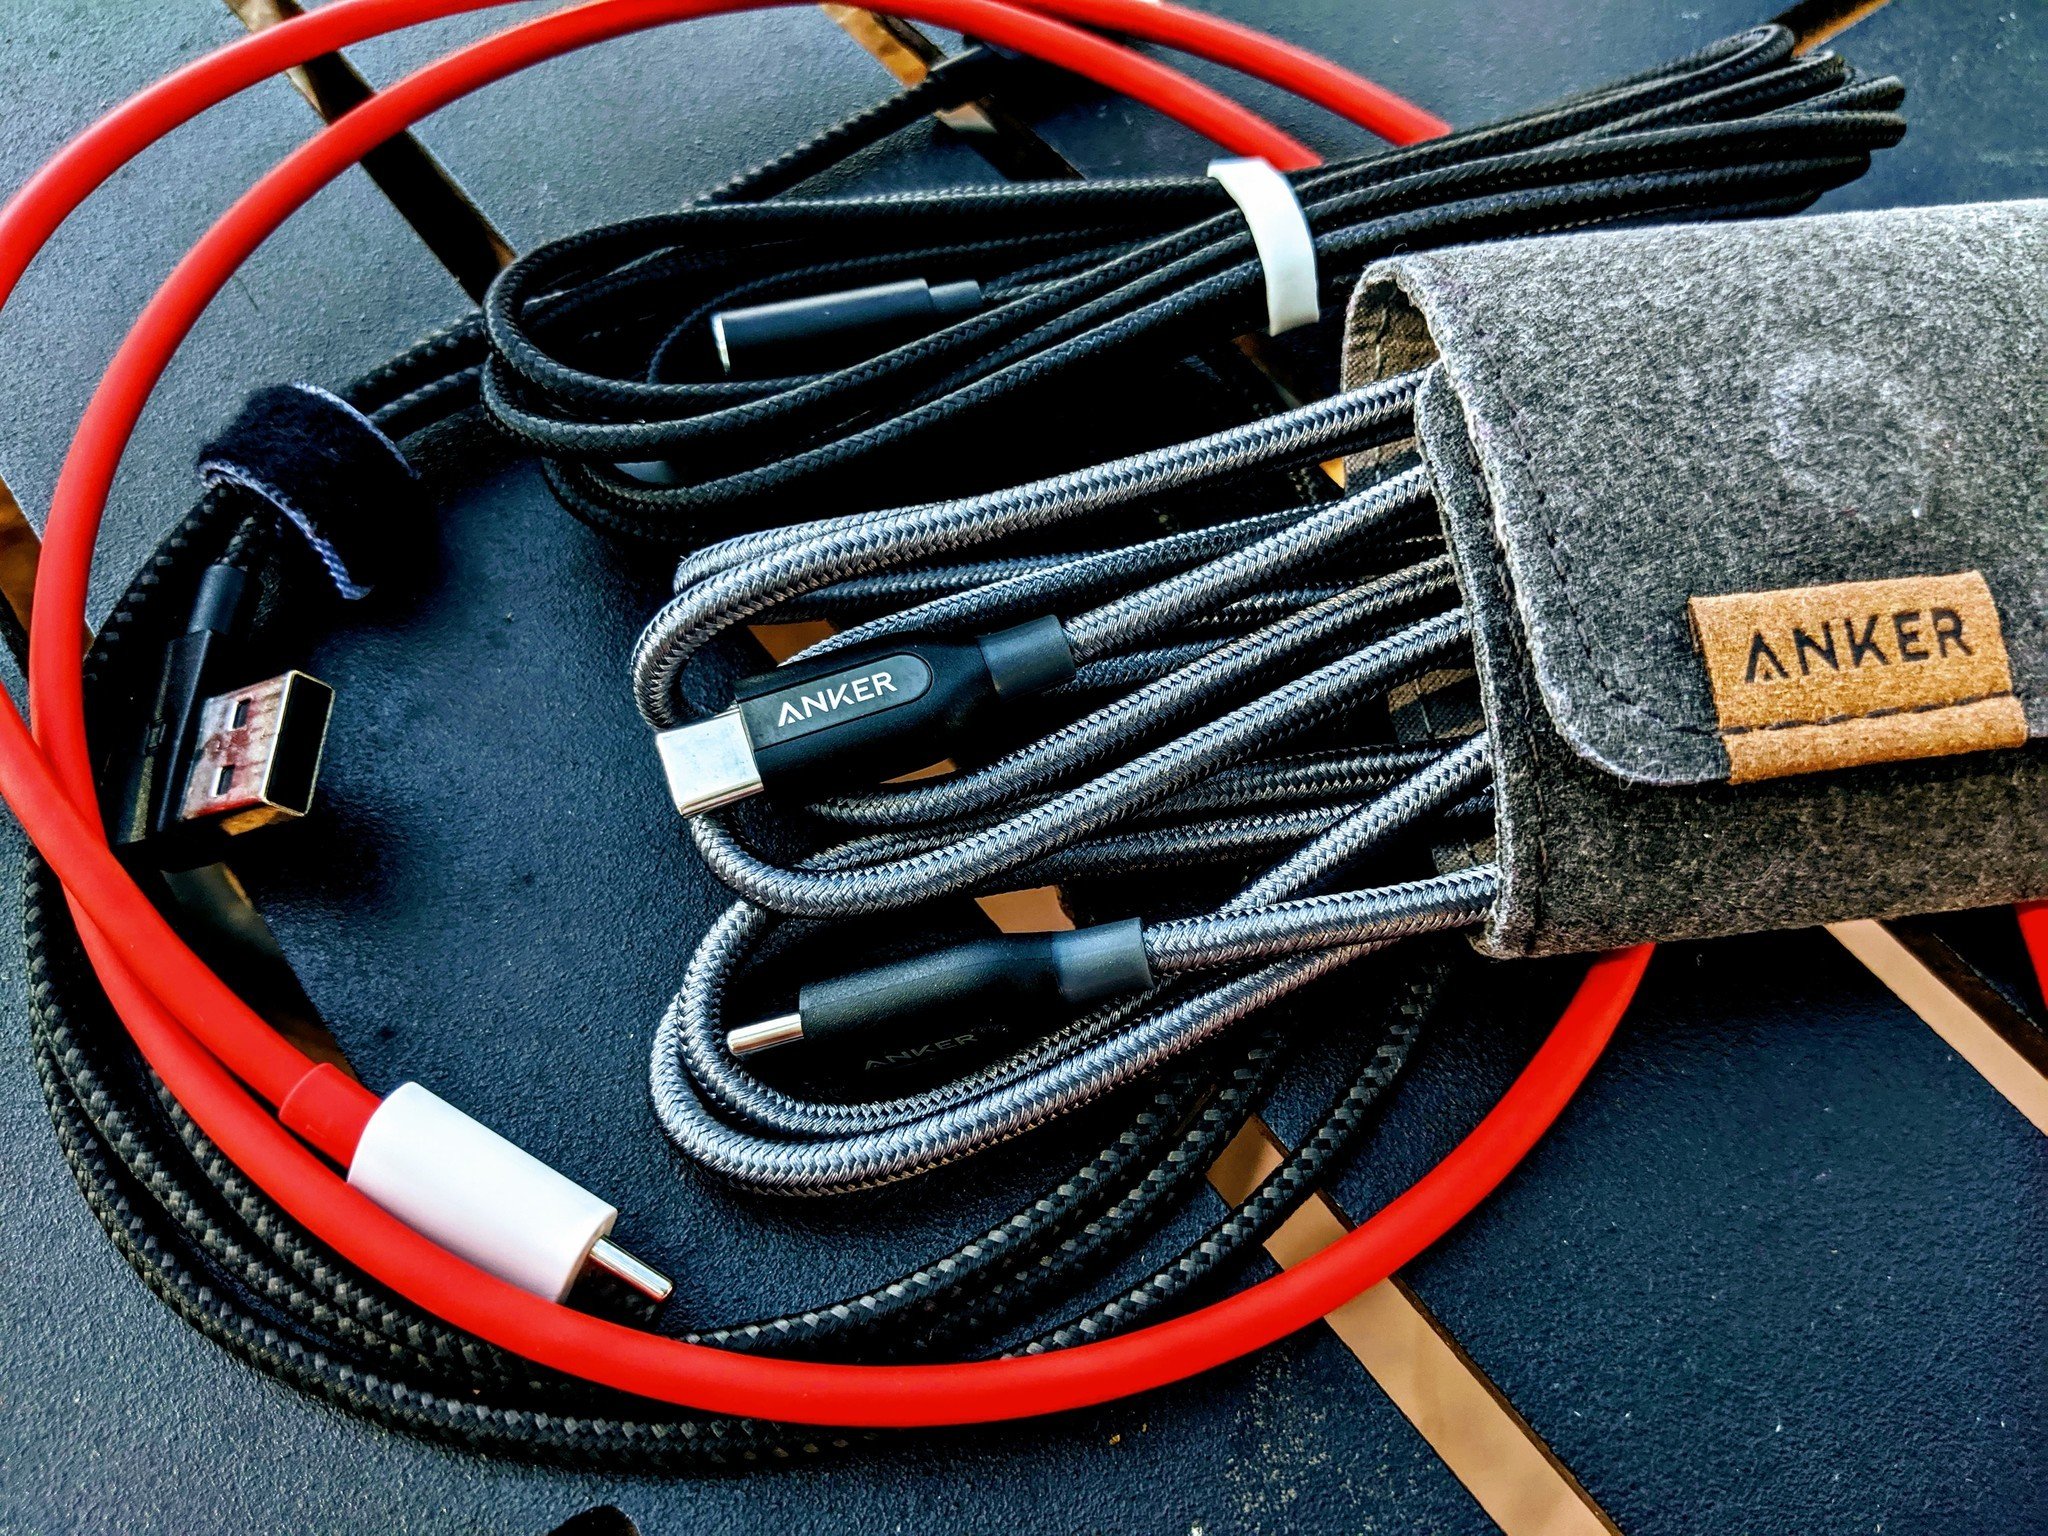 These should be the only USB cables you need